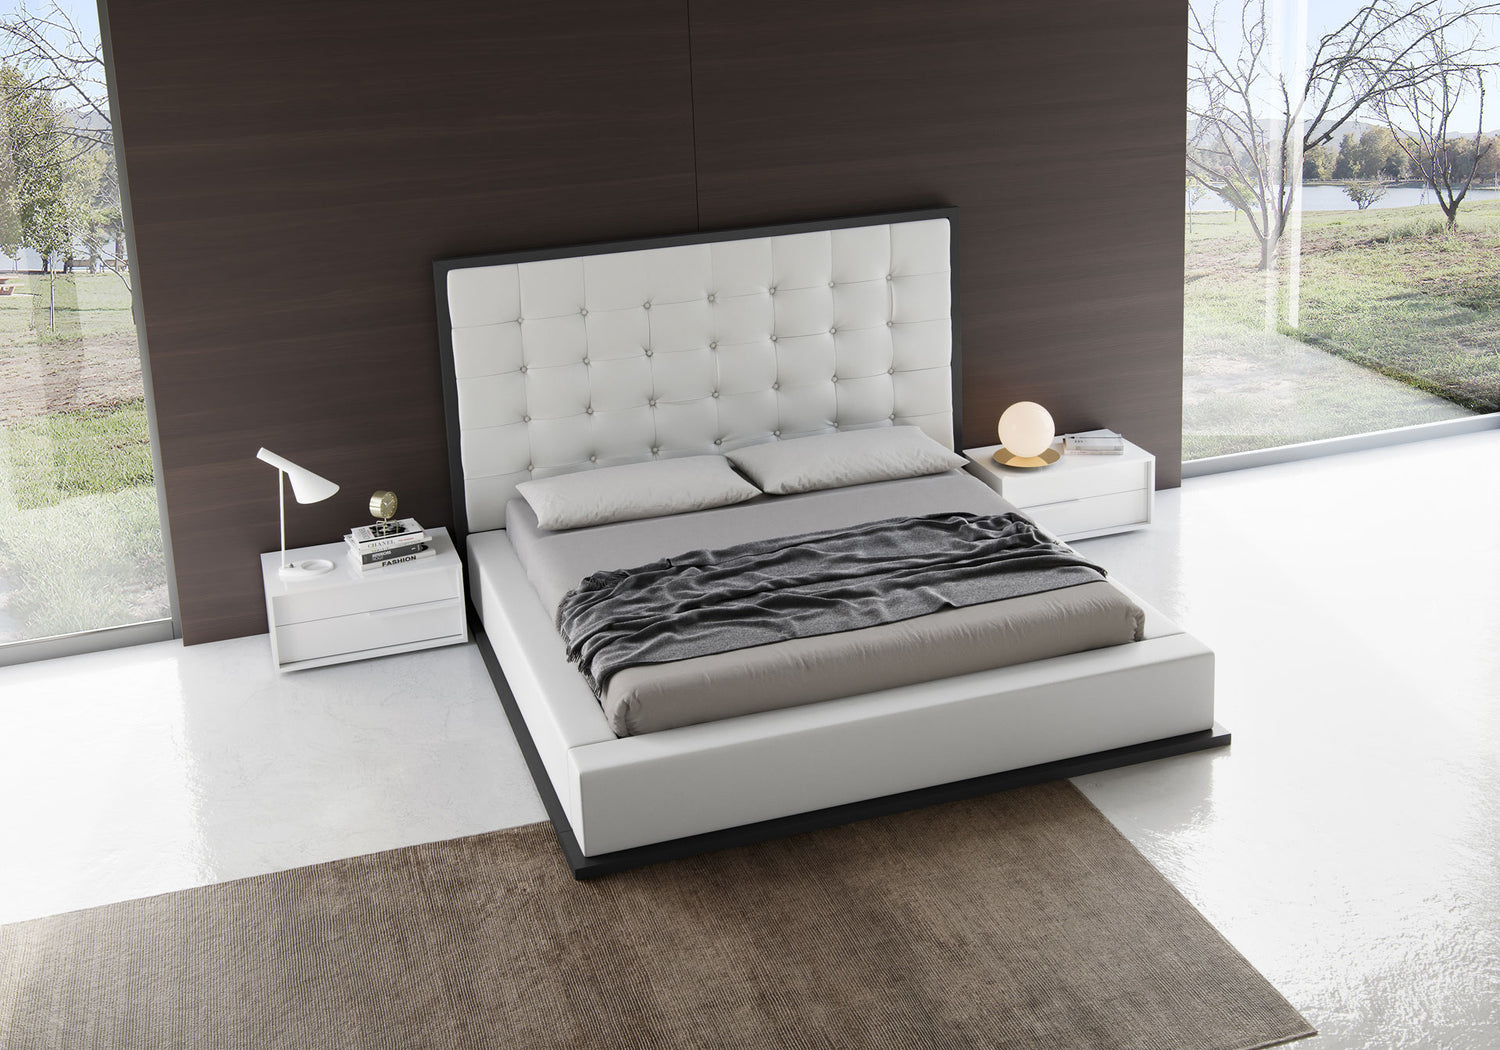 How to Choose New Bedroom Furniture